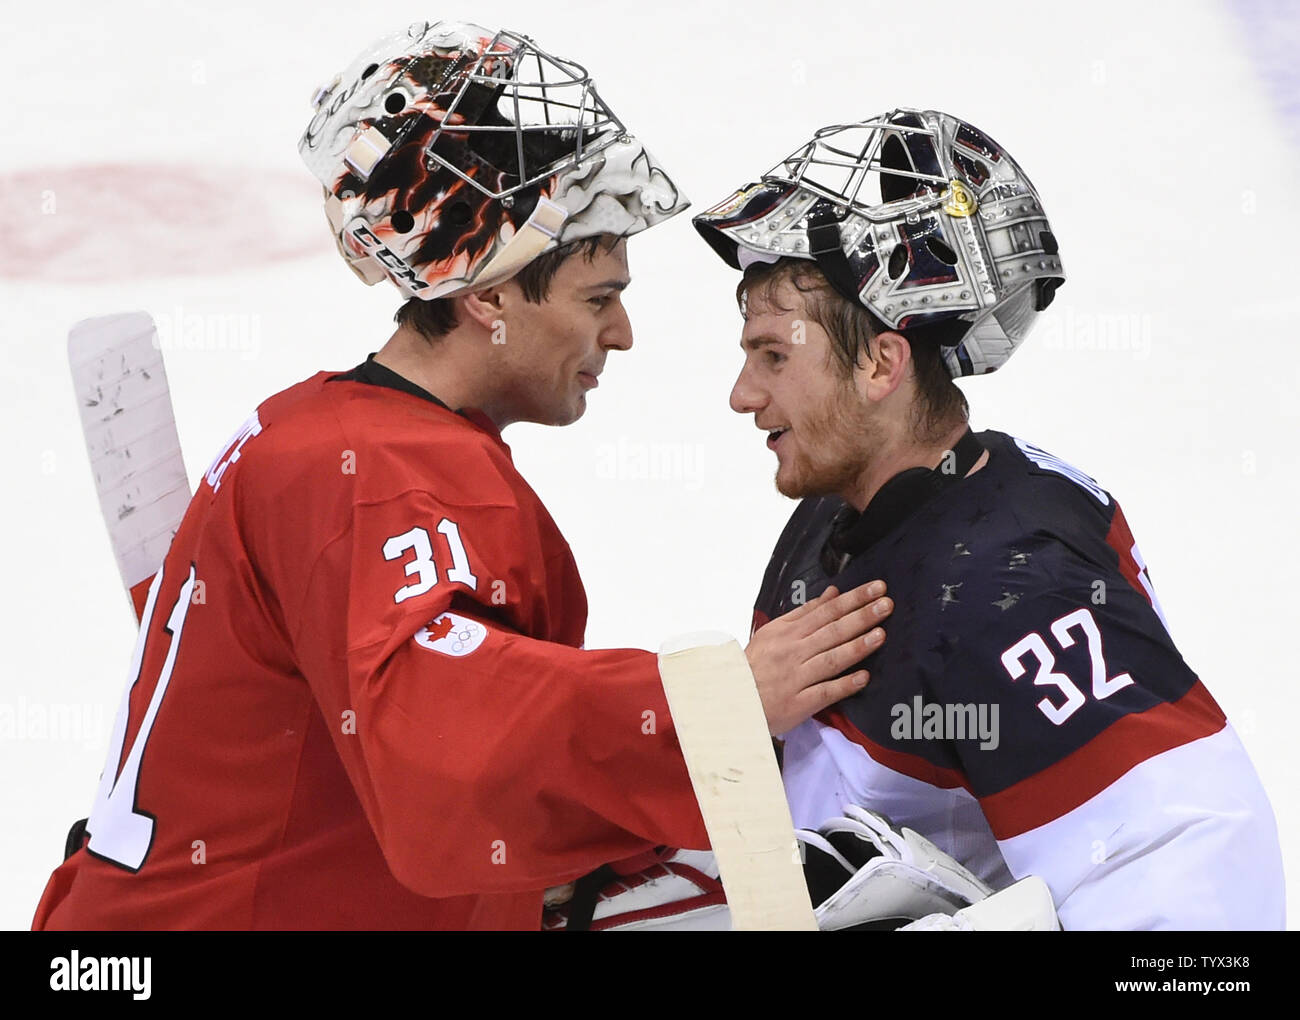 vork Over instelling Opschudding Carey Price Hockey High Resolution Stock Photography and Images - Alamy